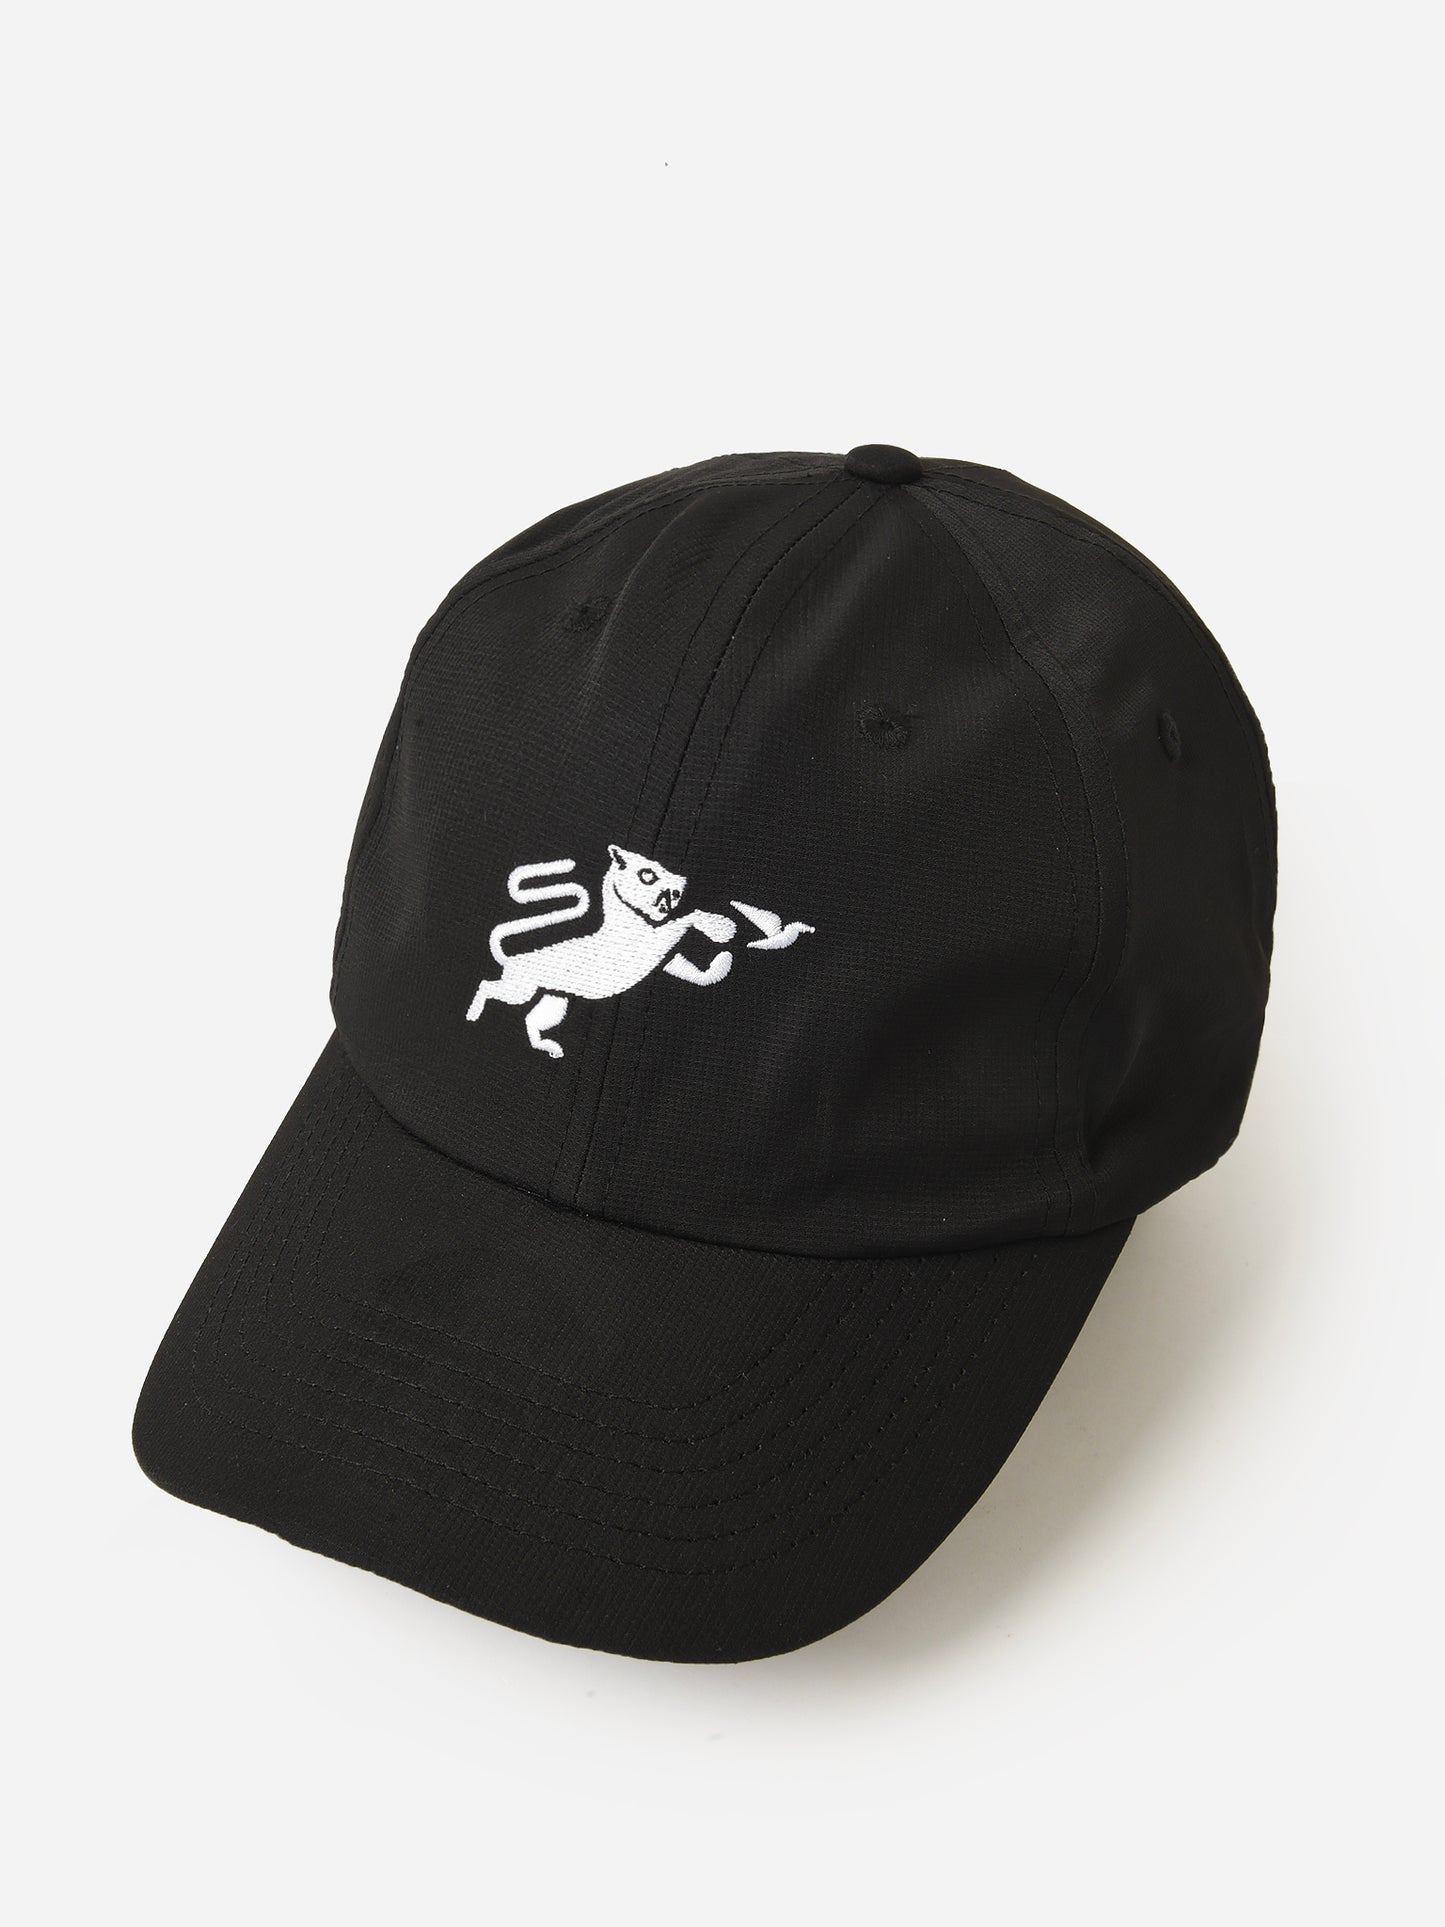 Weekend Panther Performance Hat